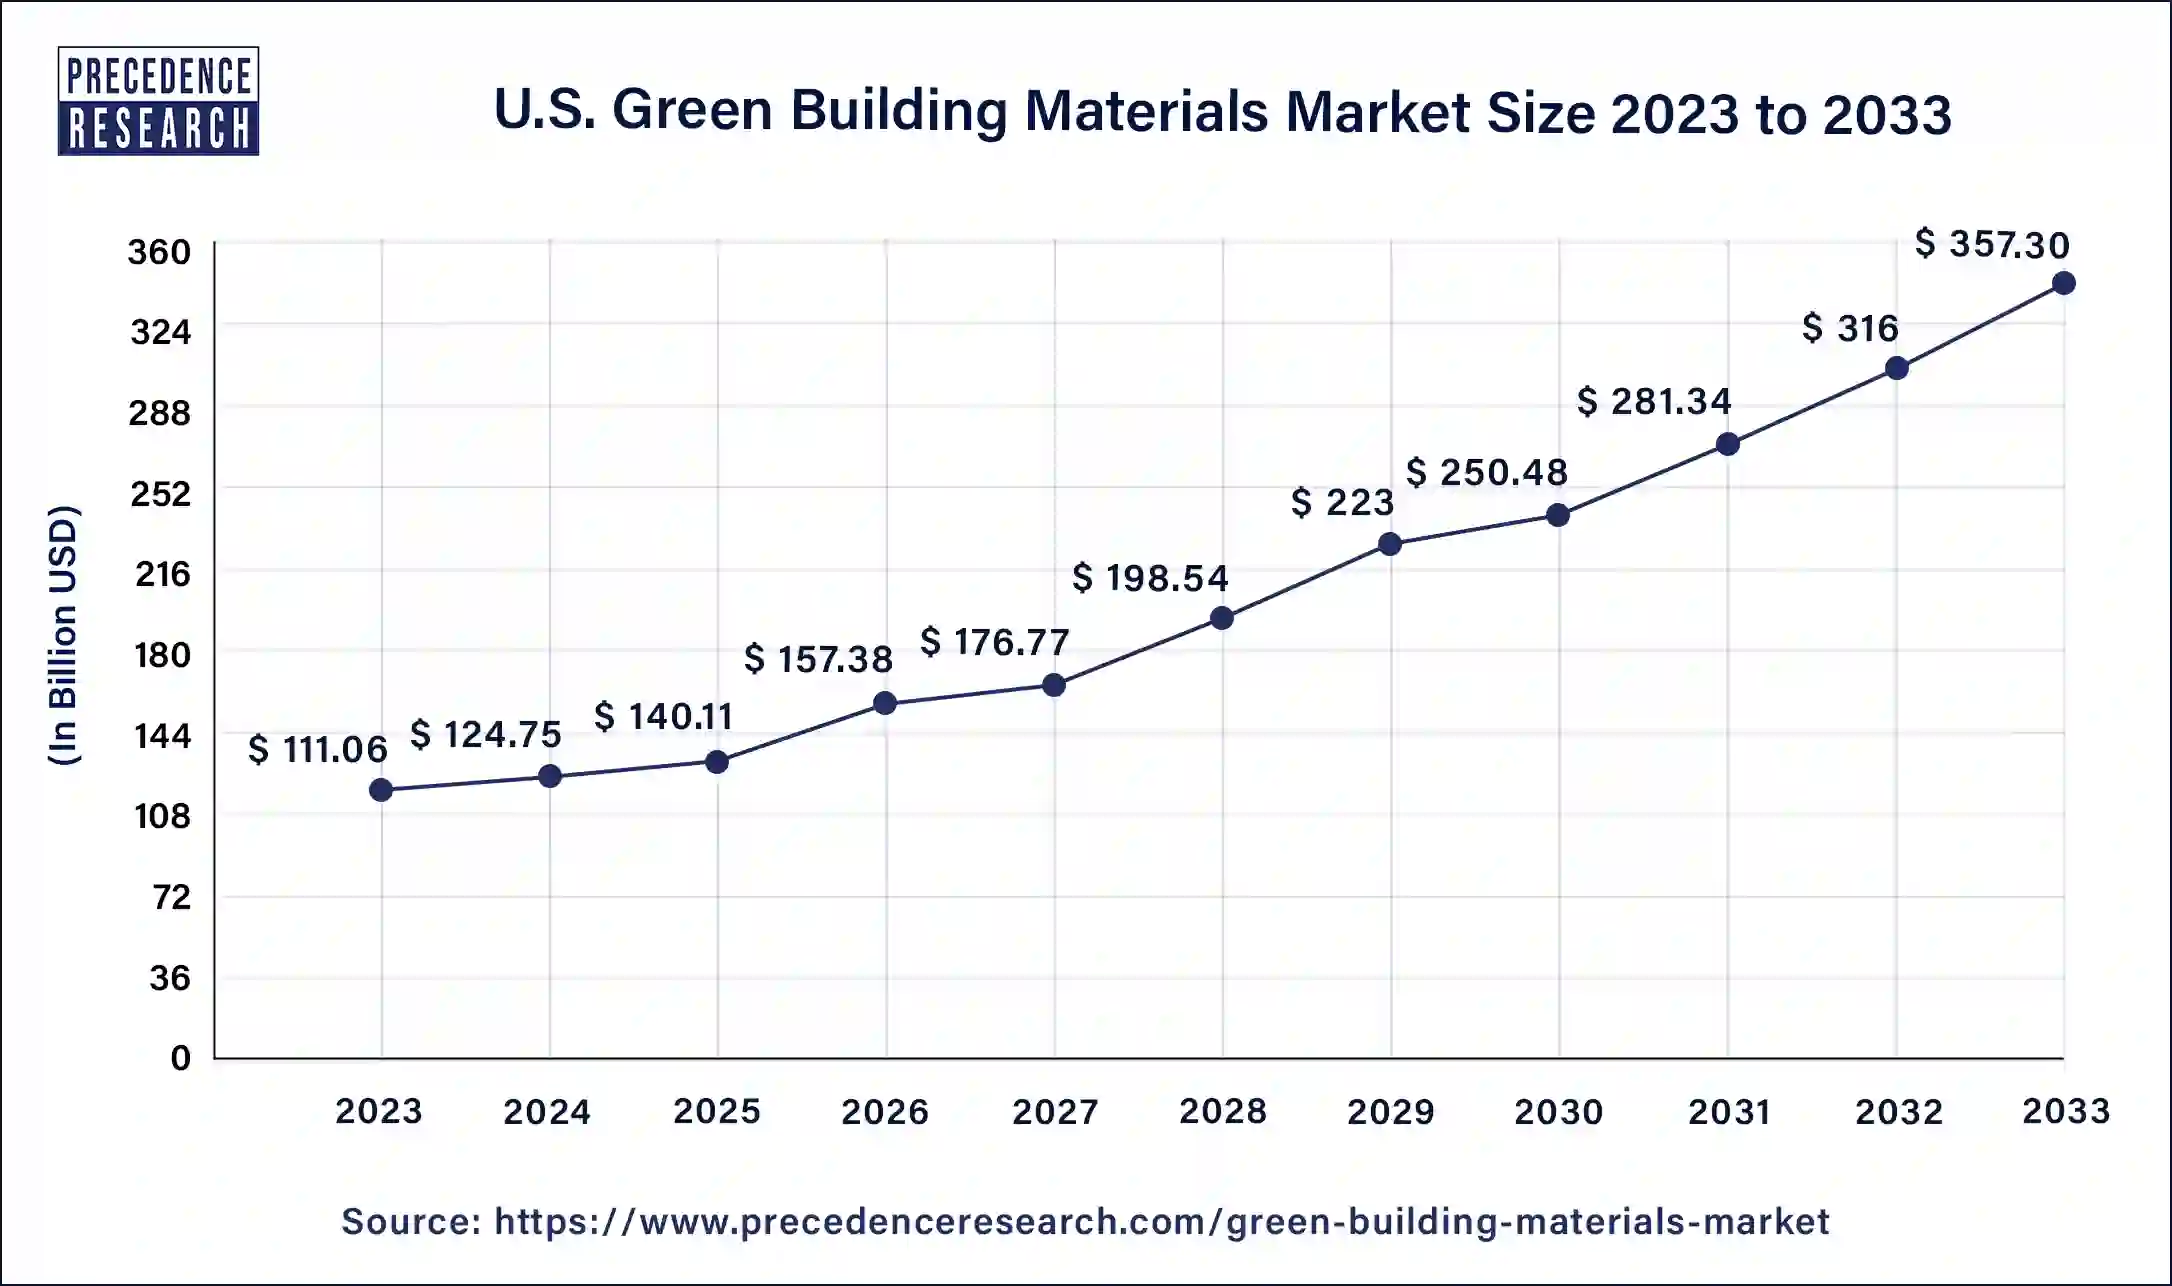 U.S. Green Building Materials Market Size 2024 to 2033